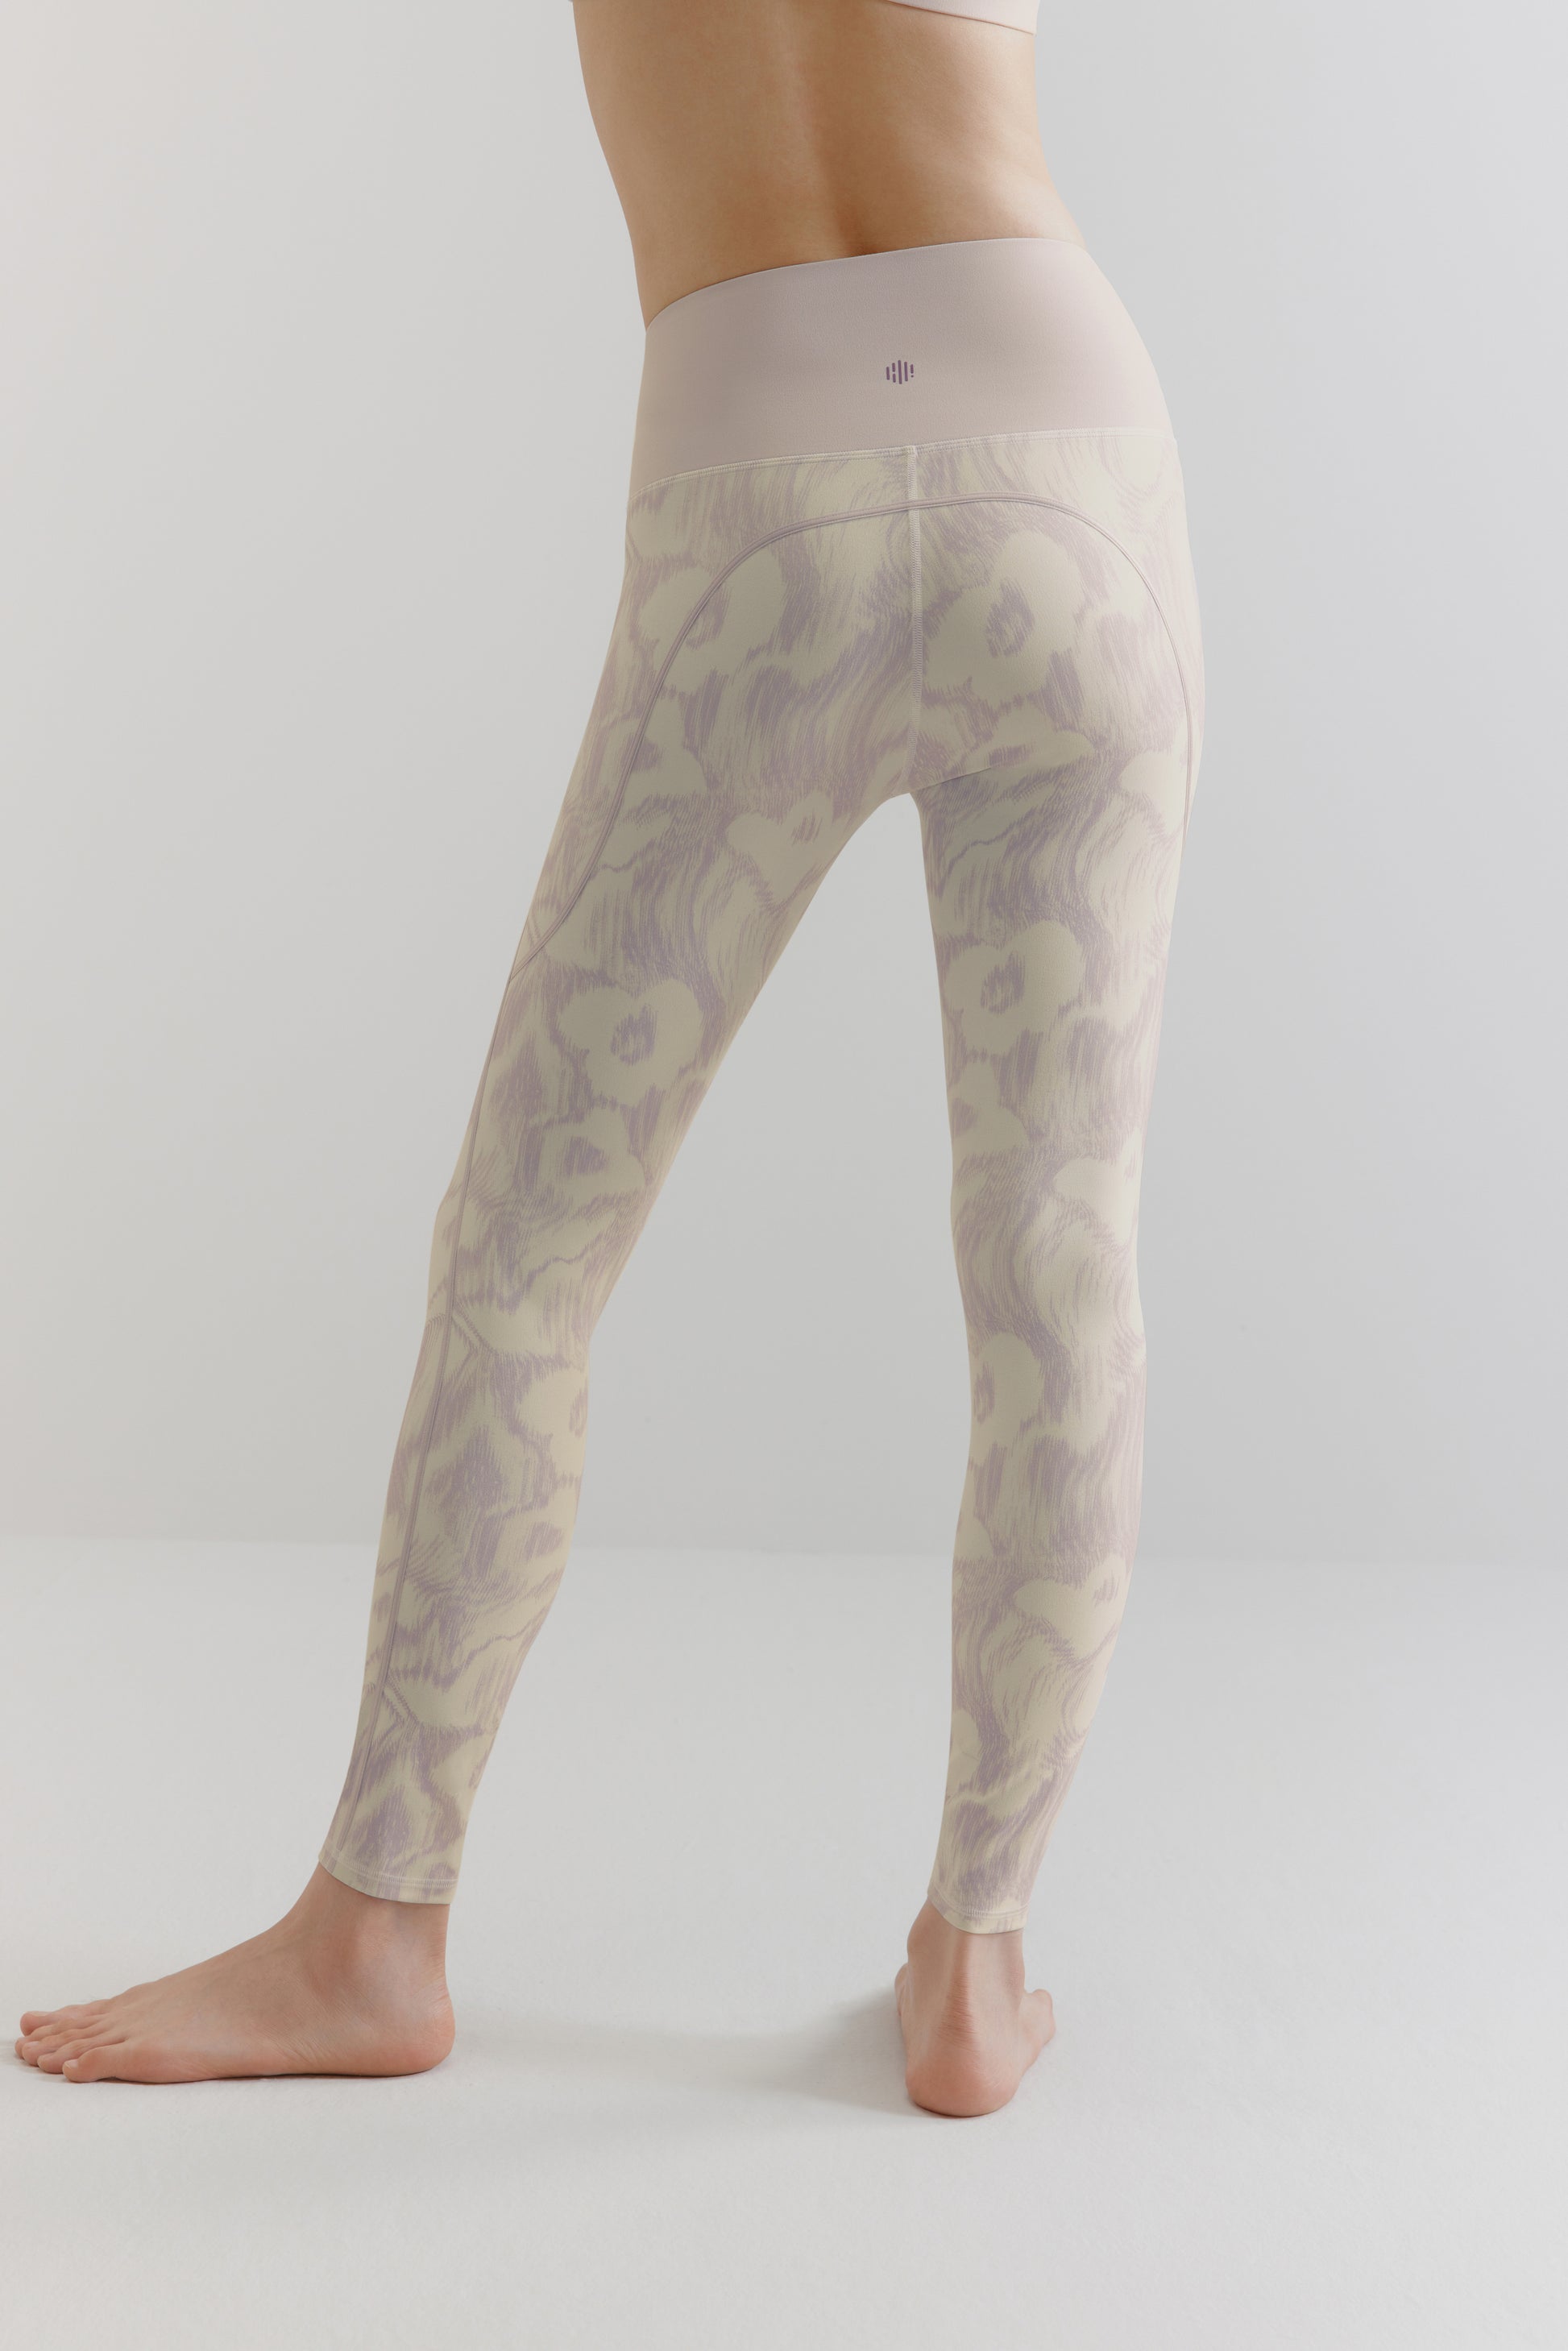 The back of the purple and white patterned leggings.